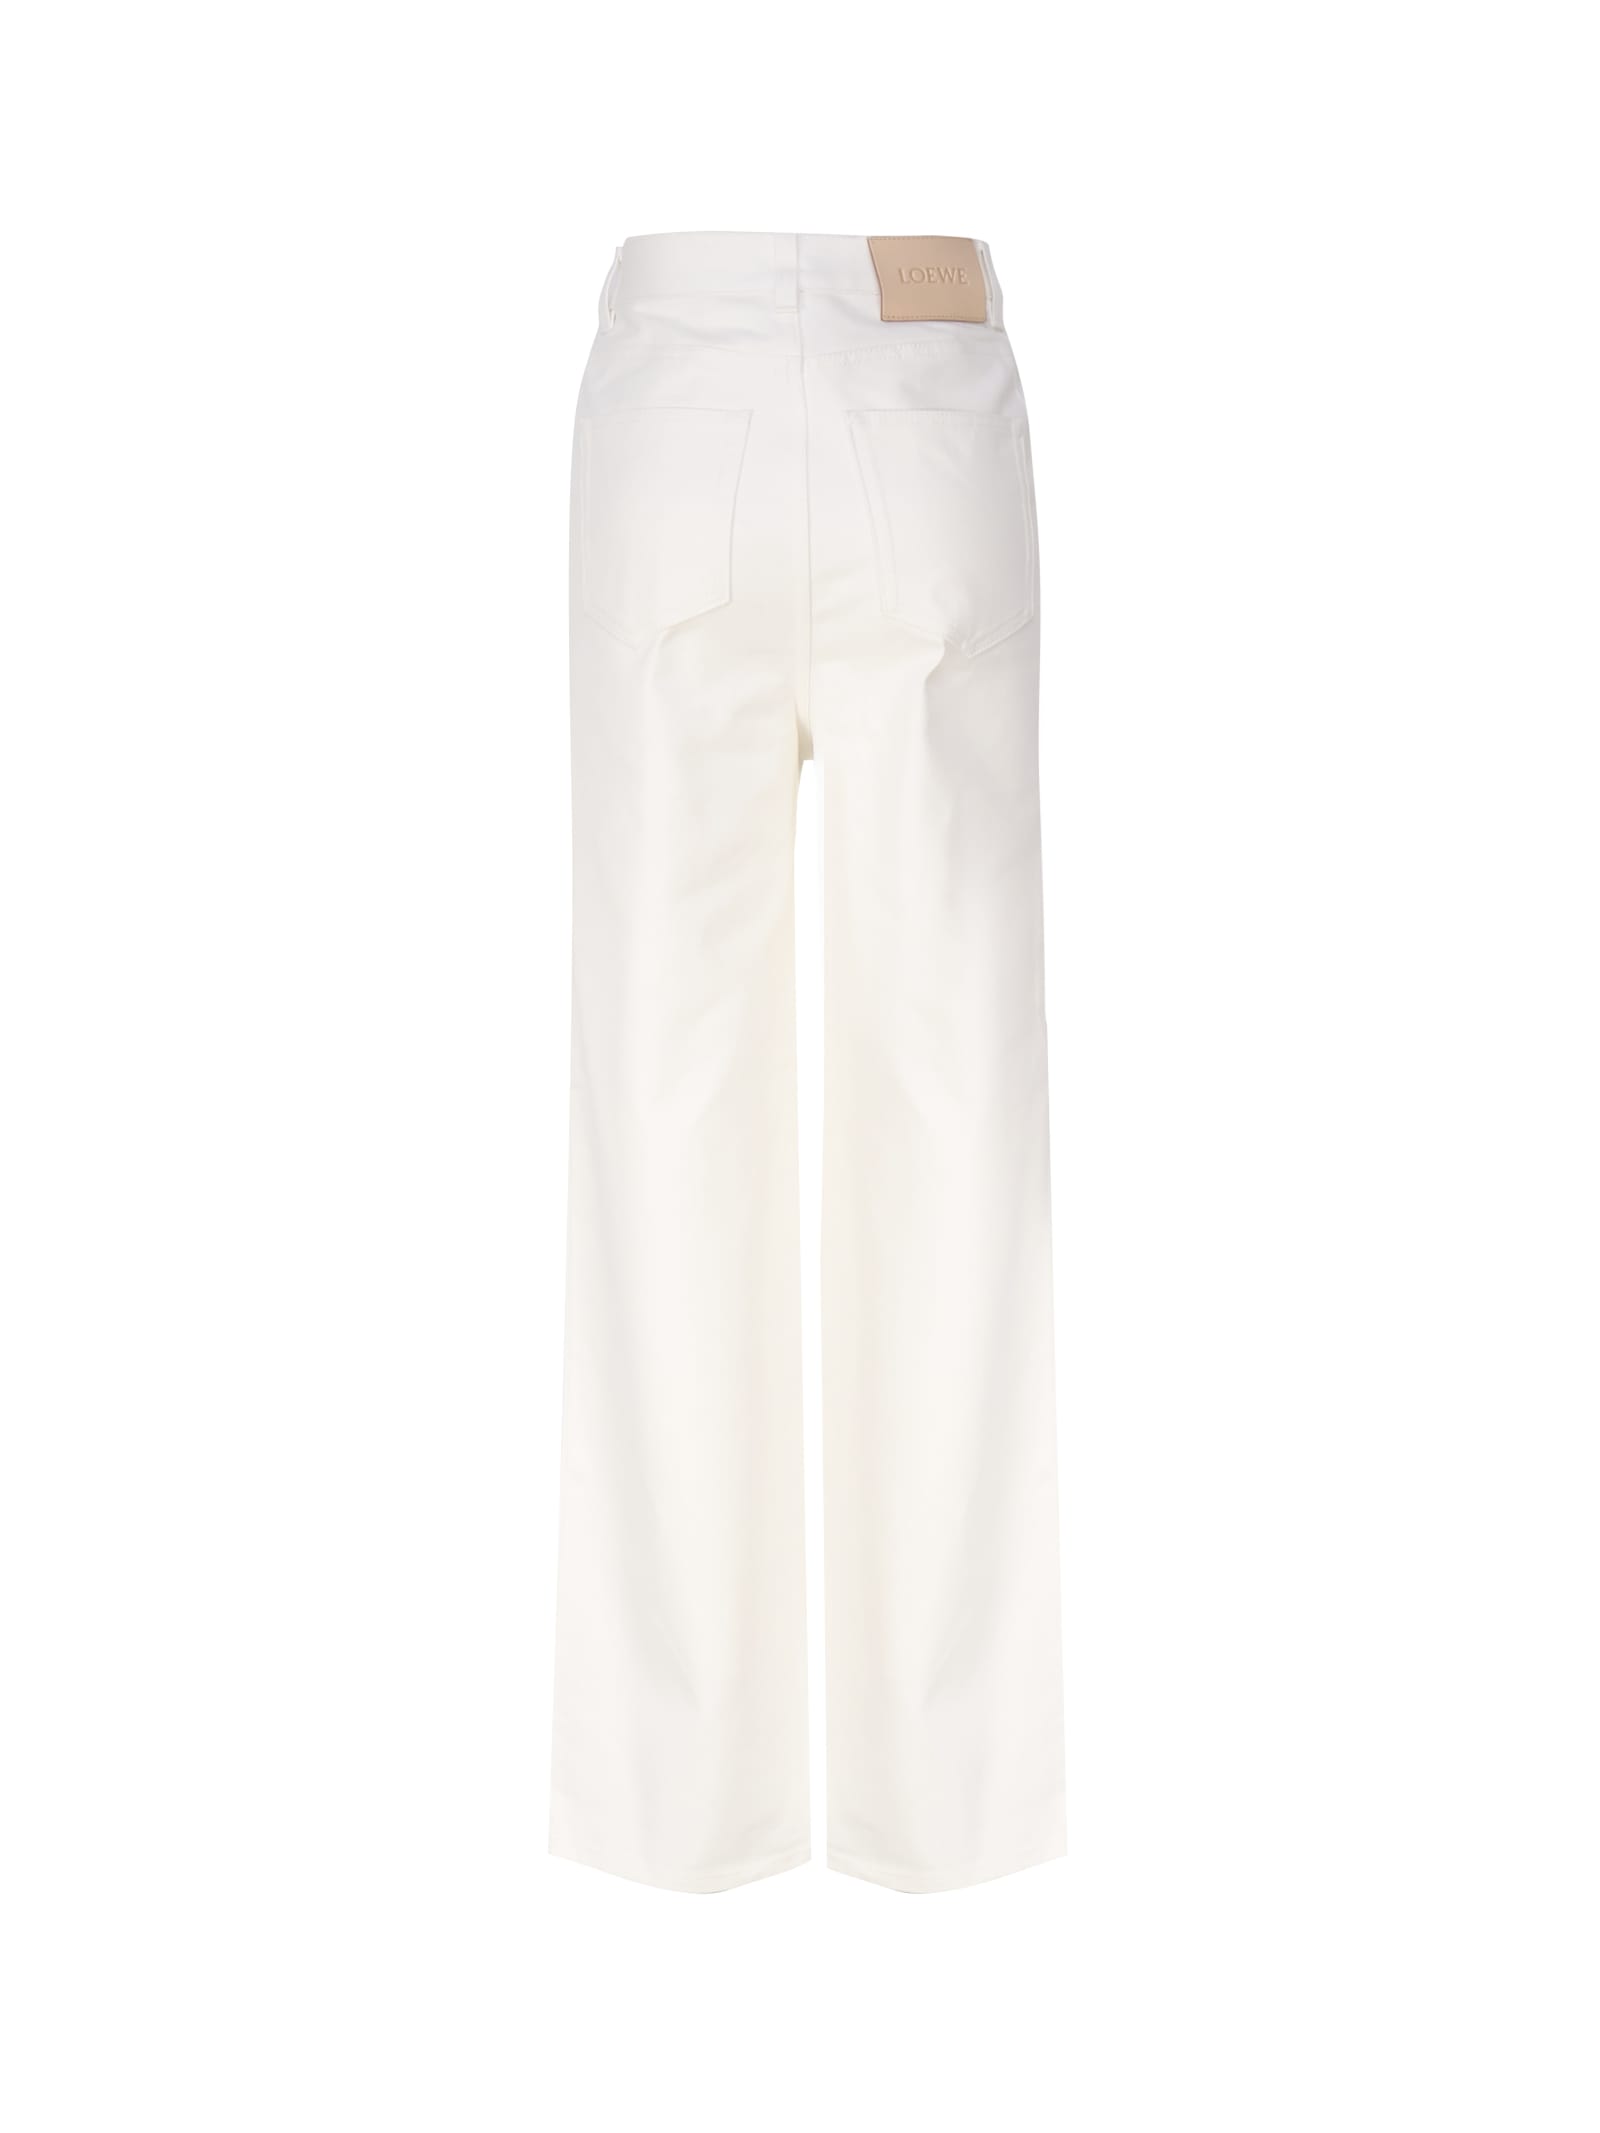 Shop Loewe Jeans Crafted In Medium-weight Washed Cotton Denim In White